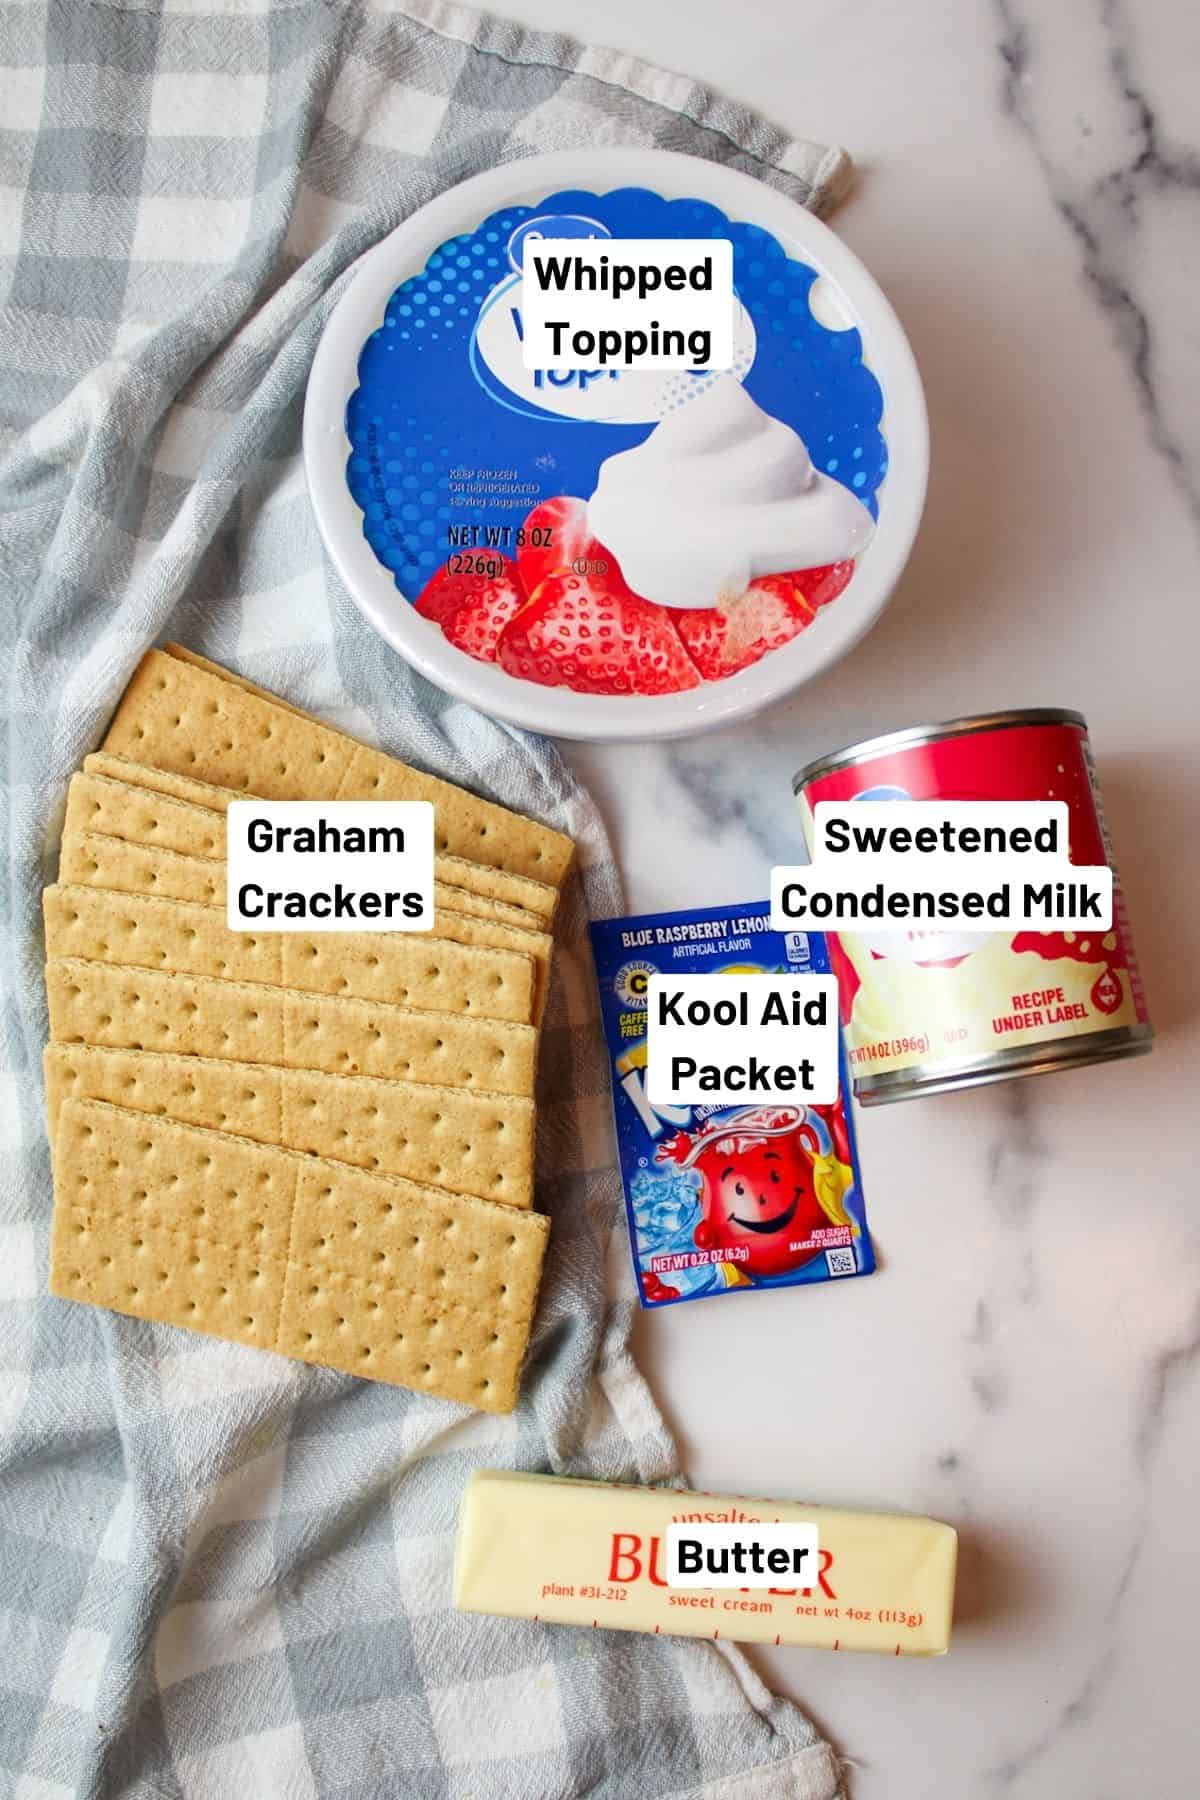 ingredients needed to make kool aid pie. Whipped topping, graham crust, condensed milk and kool aid packet